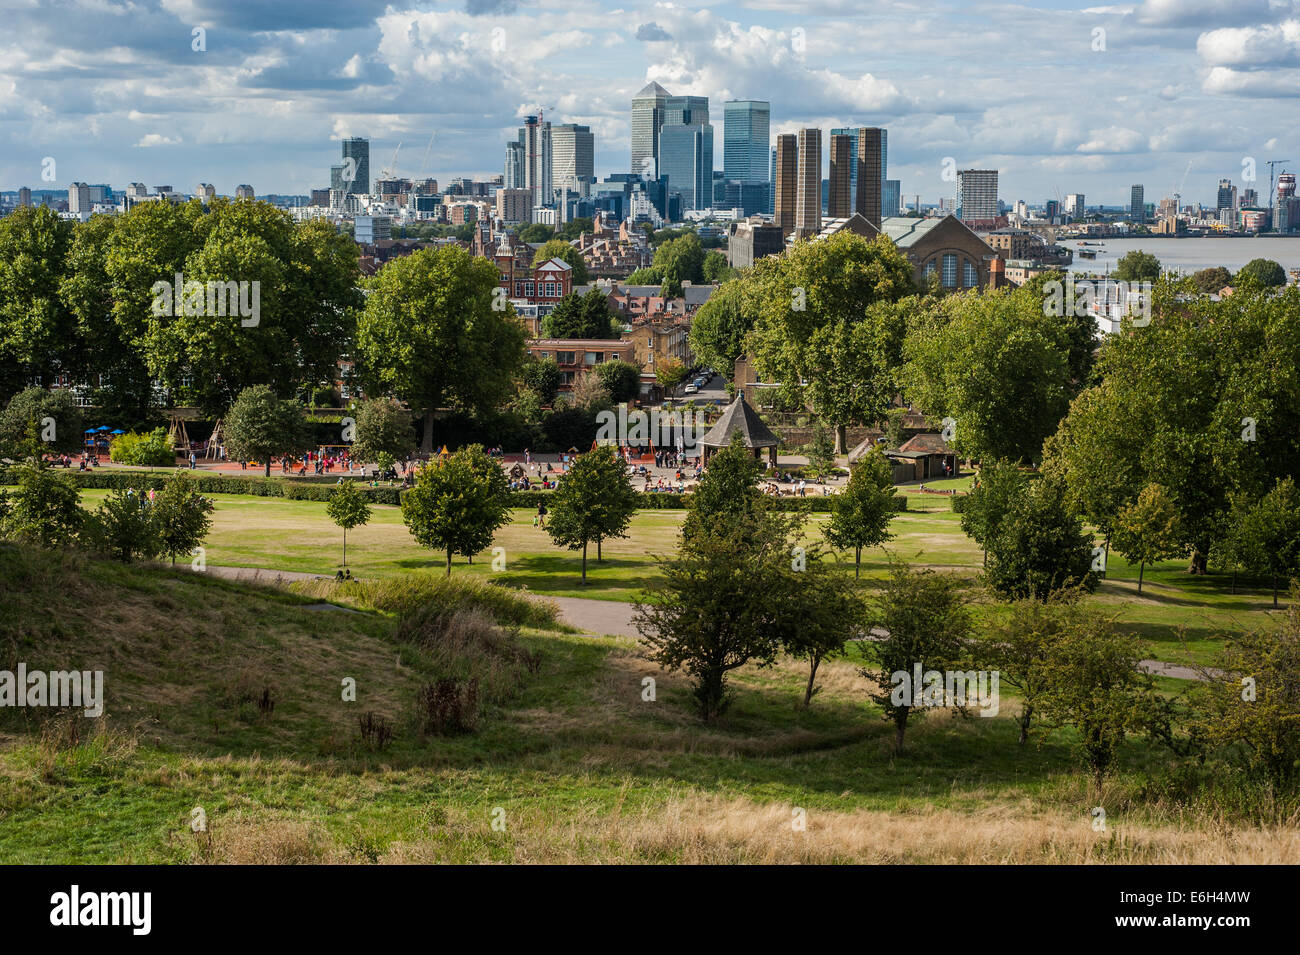 The financial district of Canary Wharf in London under dramatic sky seen from Greenwich Park. Stock Photo